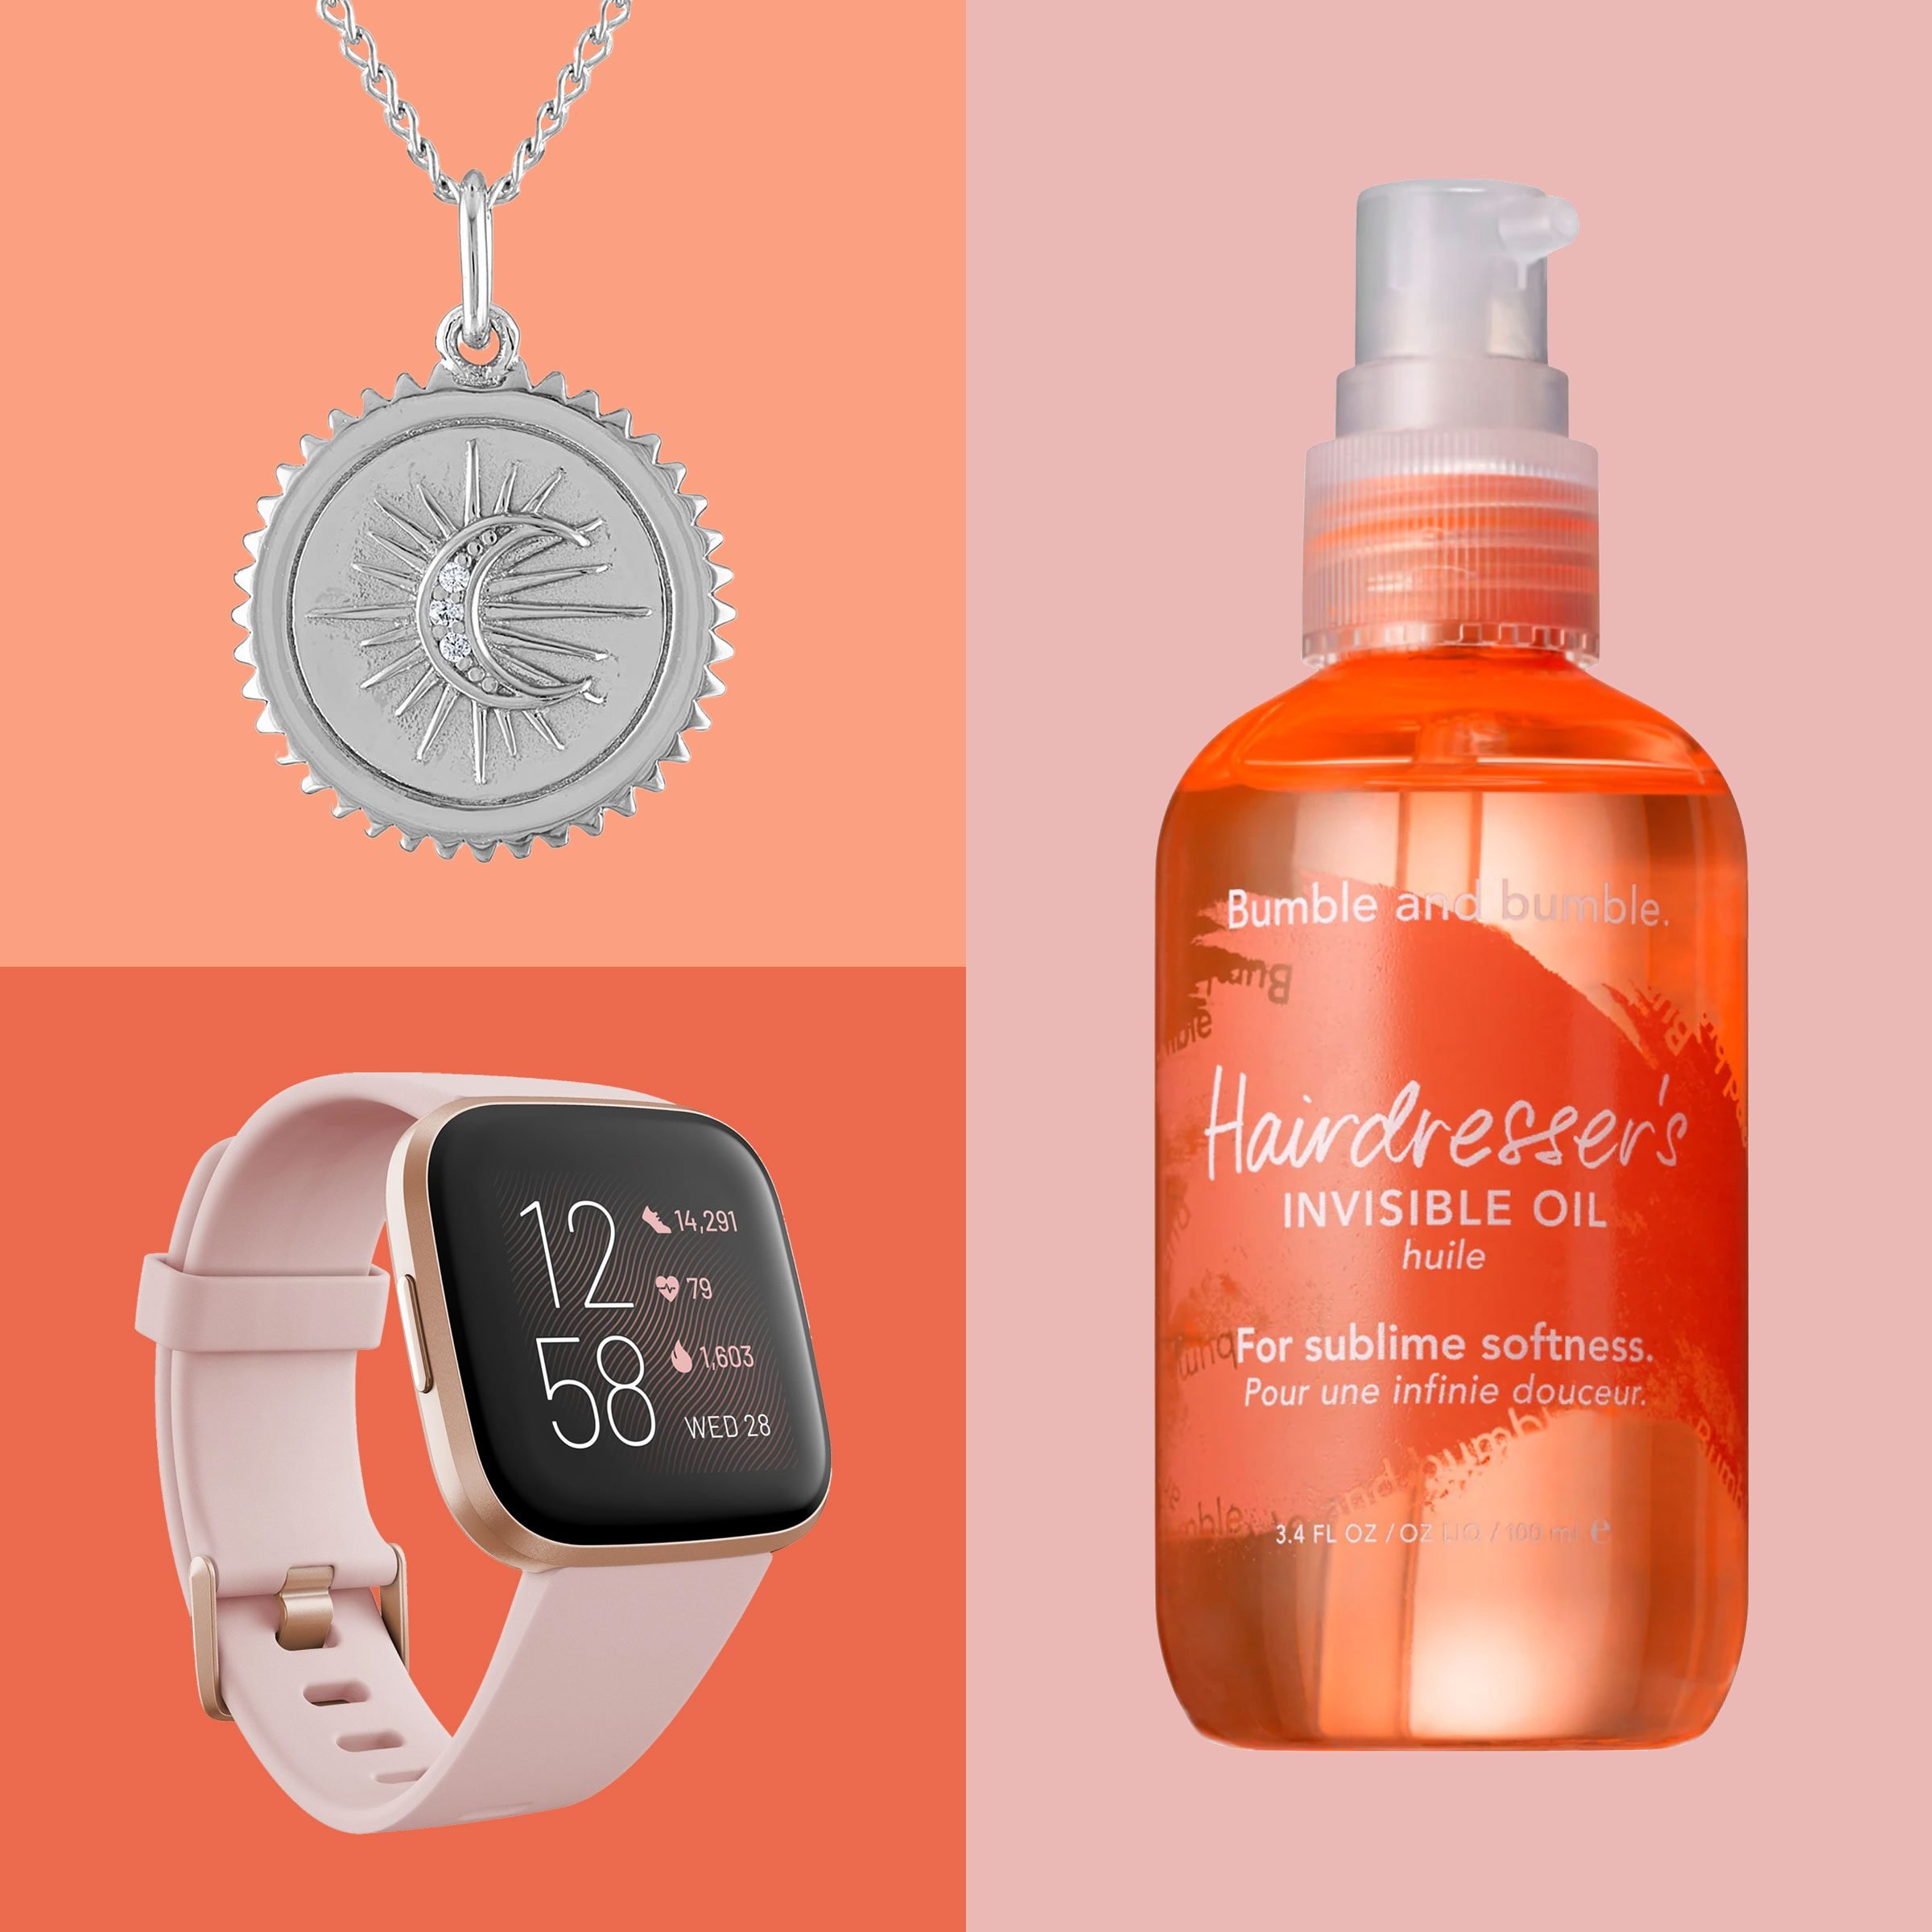 5 Insanely Good Gifts for Sisters - That They'll Love + Use!